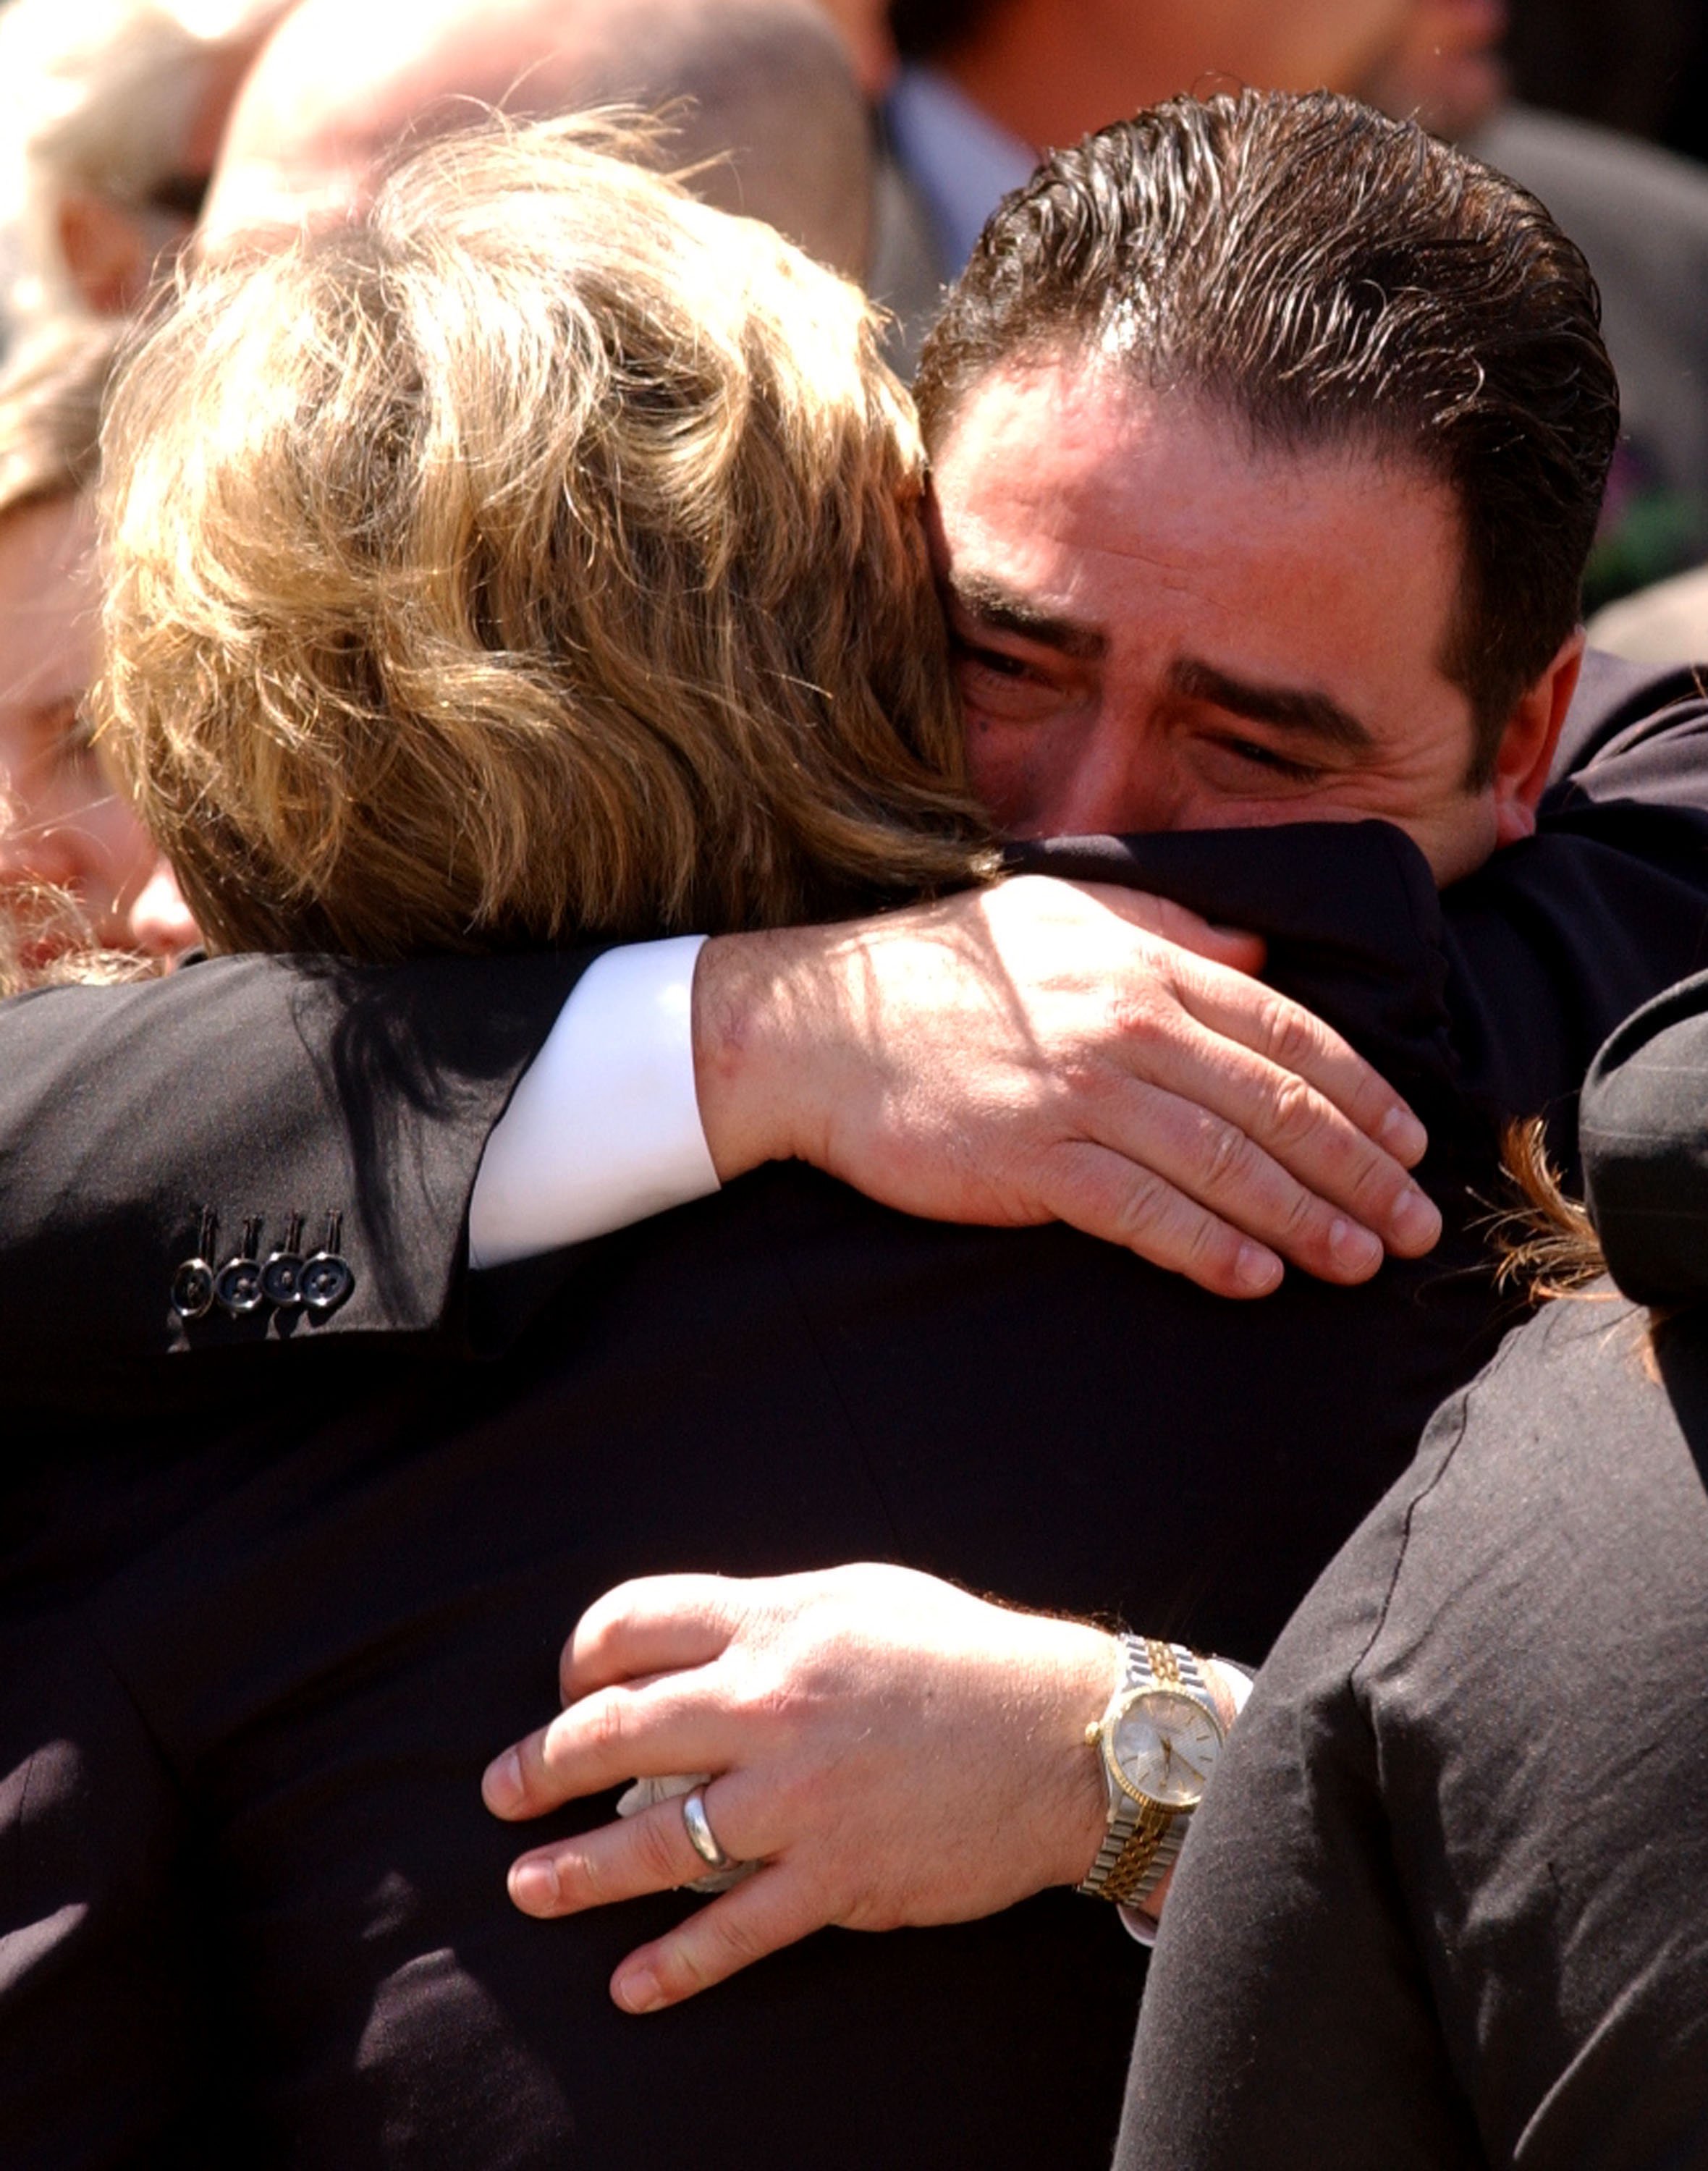 Heather Menzies is comforted by Emeril Lagasse after funeral services for the Robert Urich, April 19, 2002. | Source: Getty Images